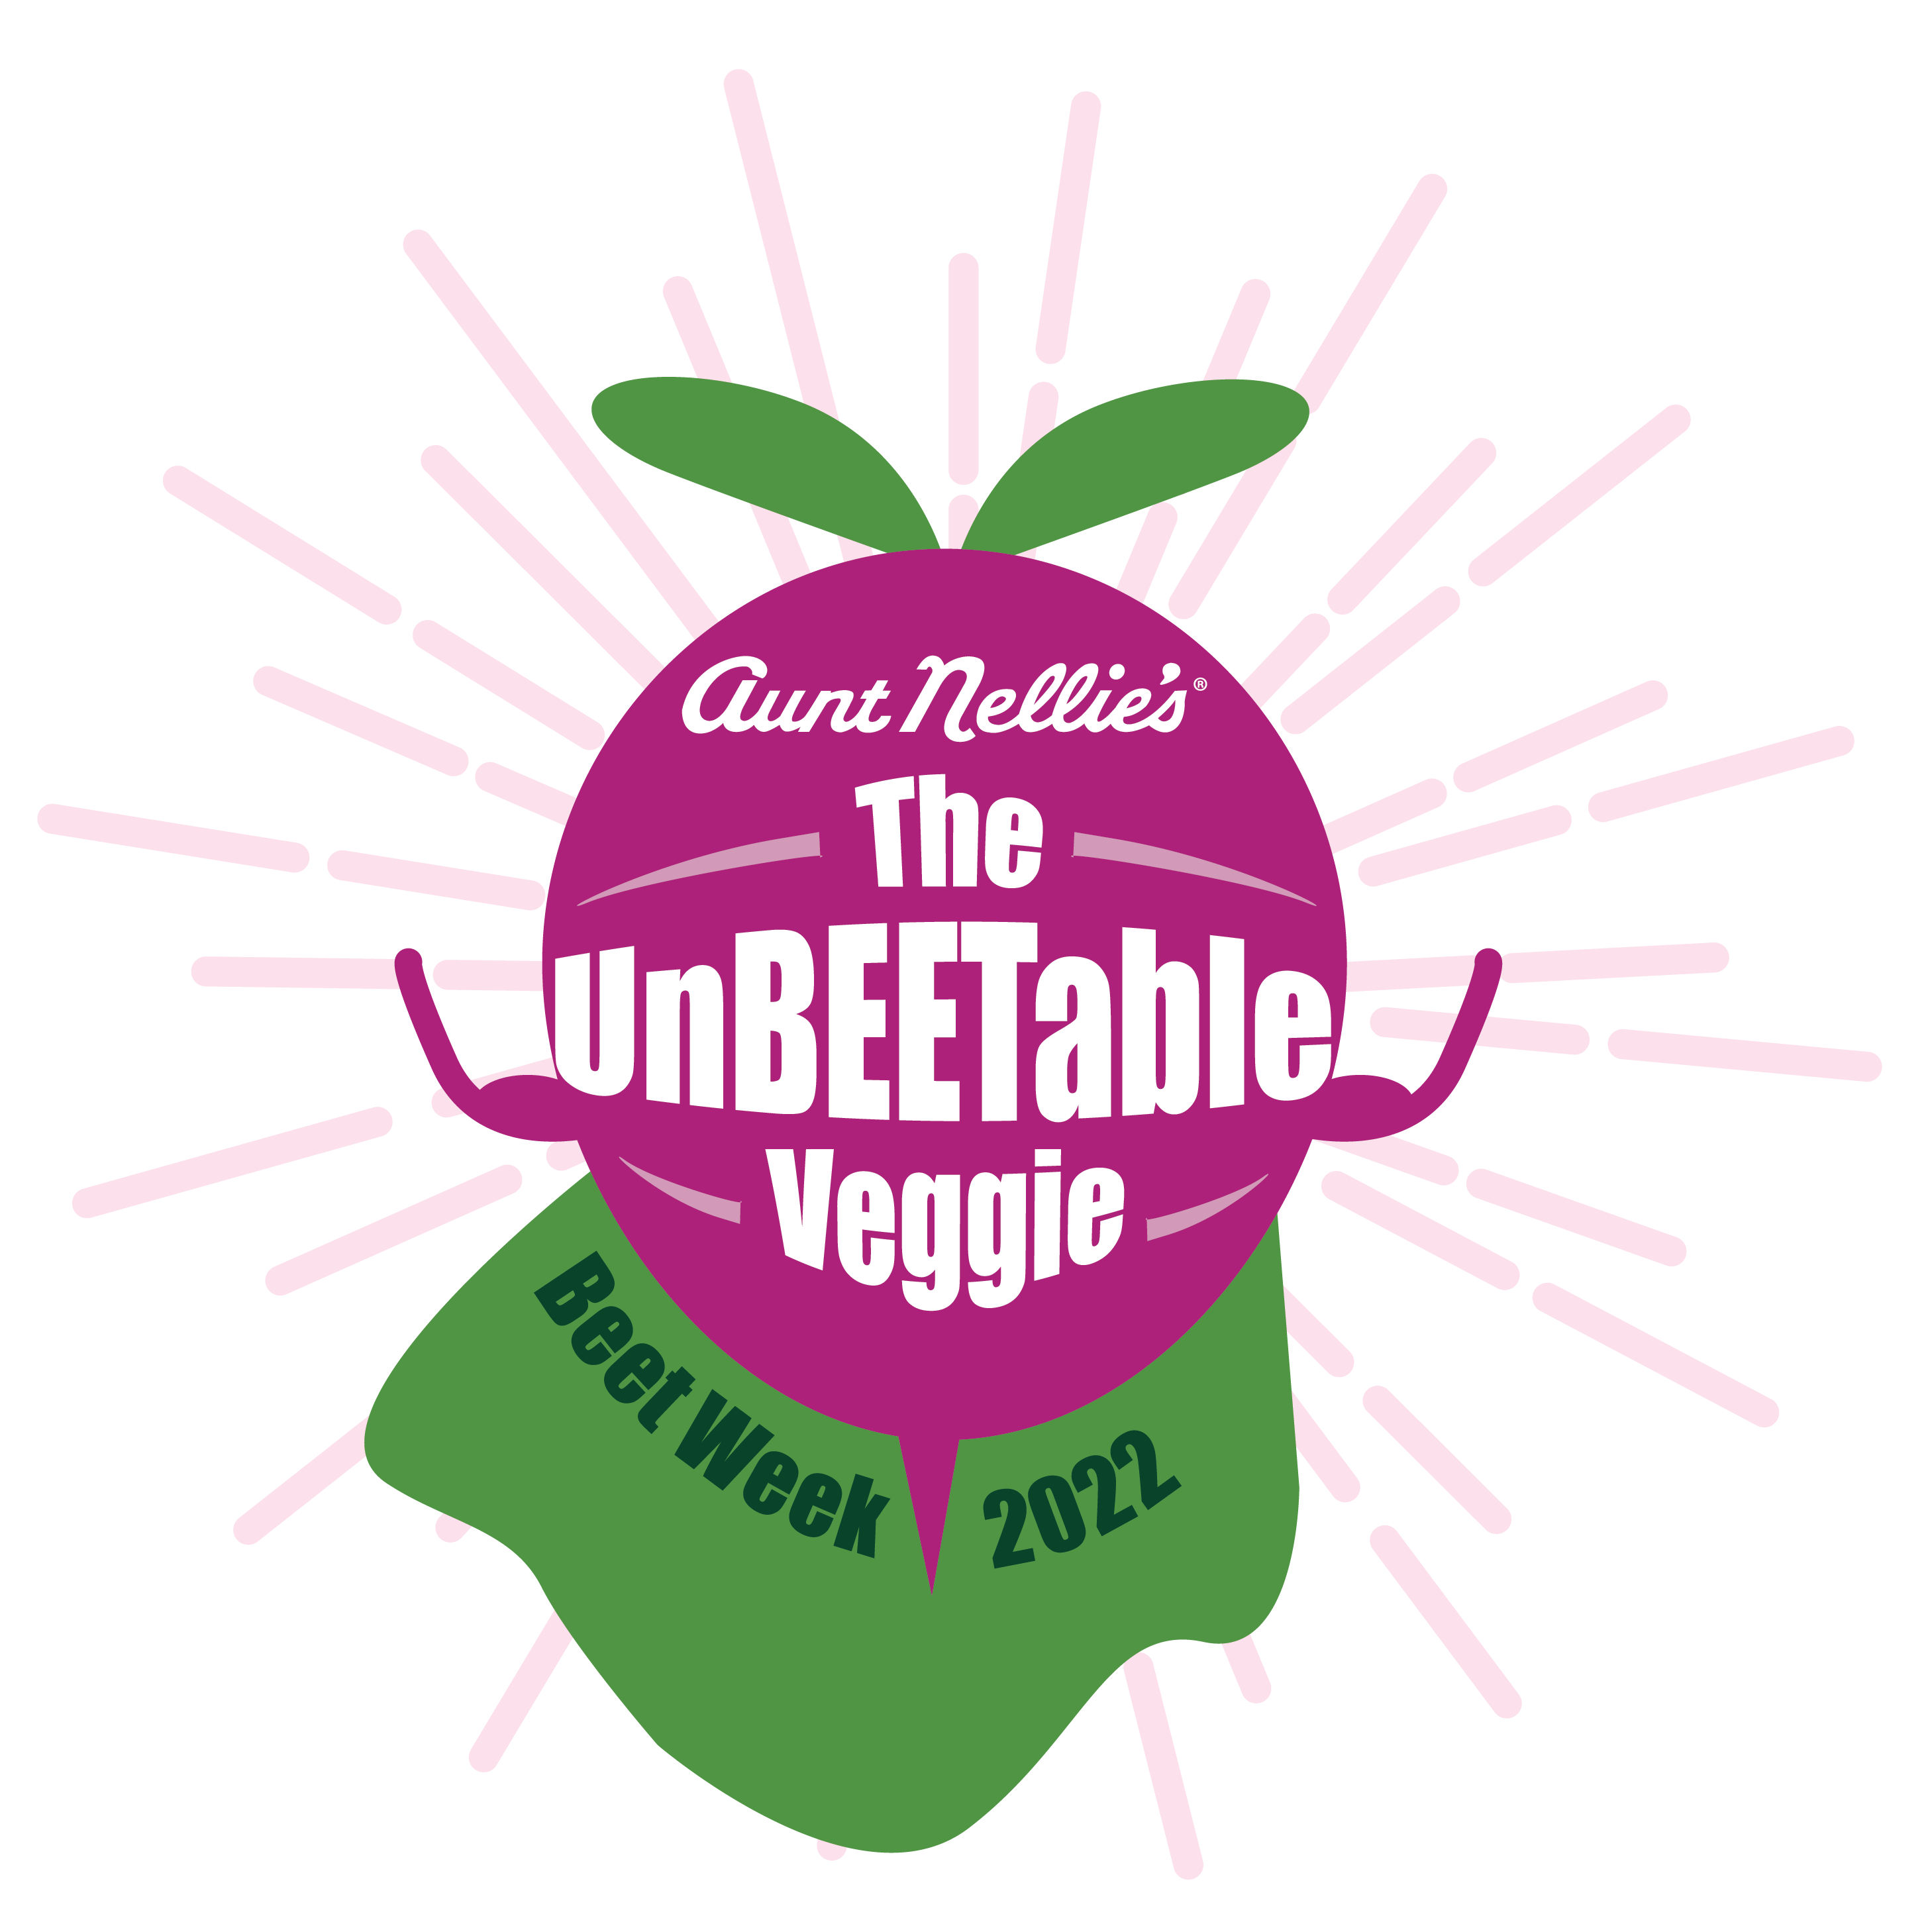 Aunt Nellie's Beets ore UNBEETABLE